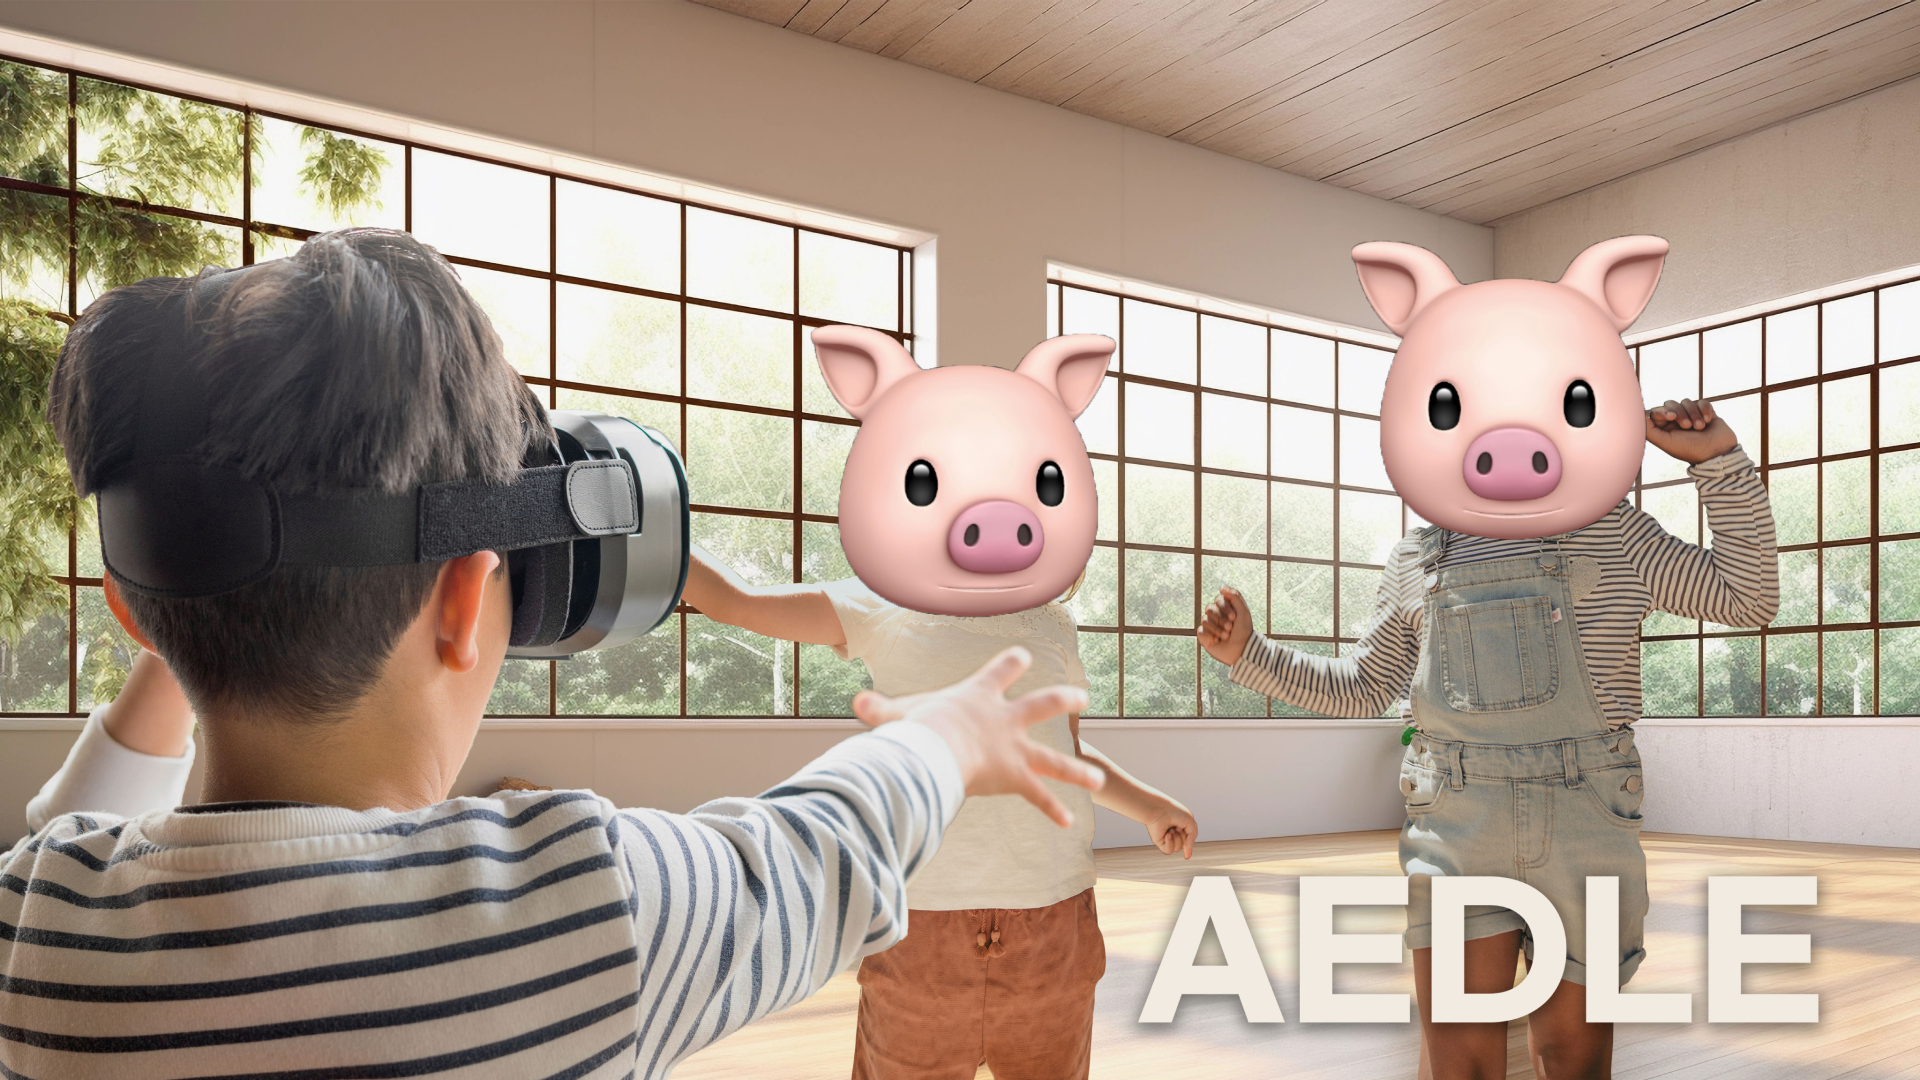 AEDLE: AR Drama Therapy Interface